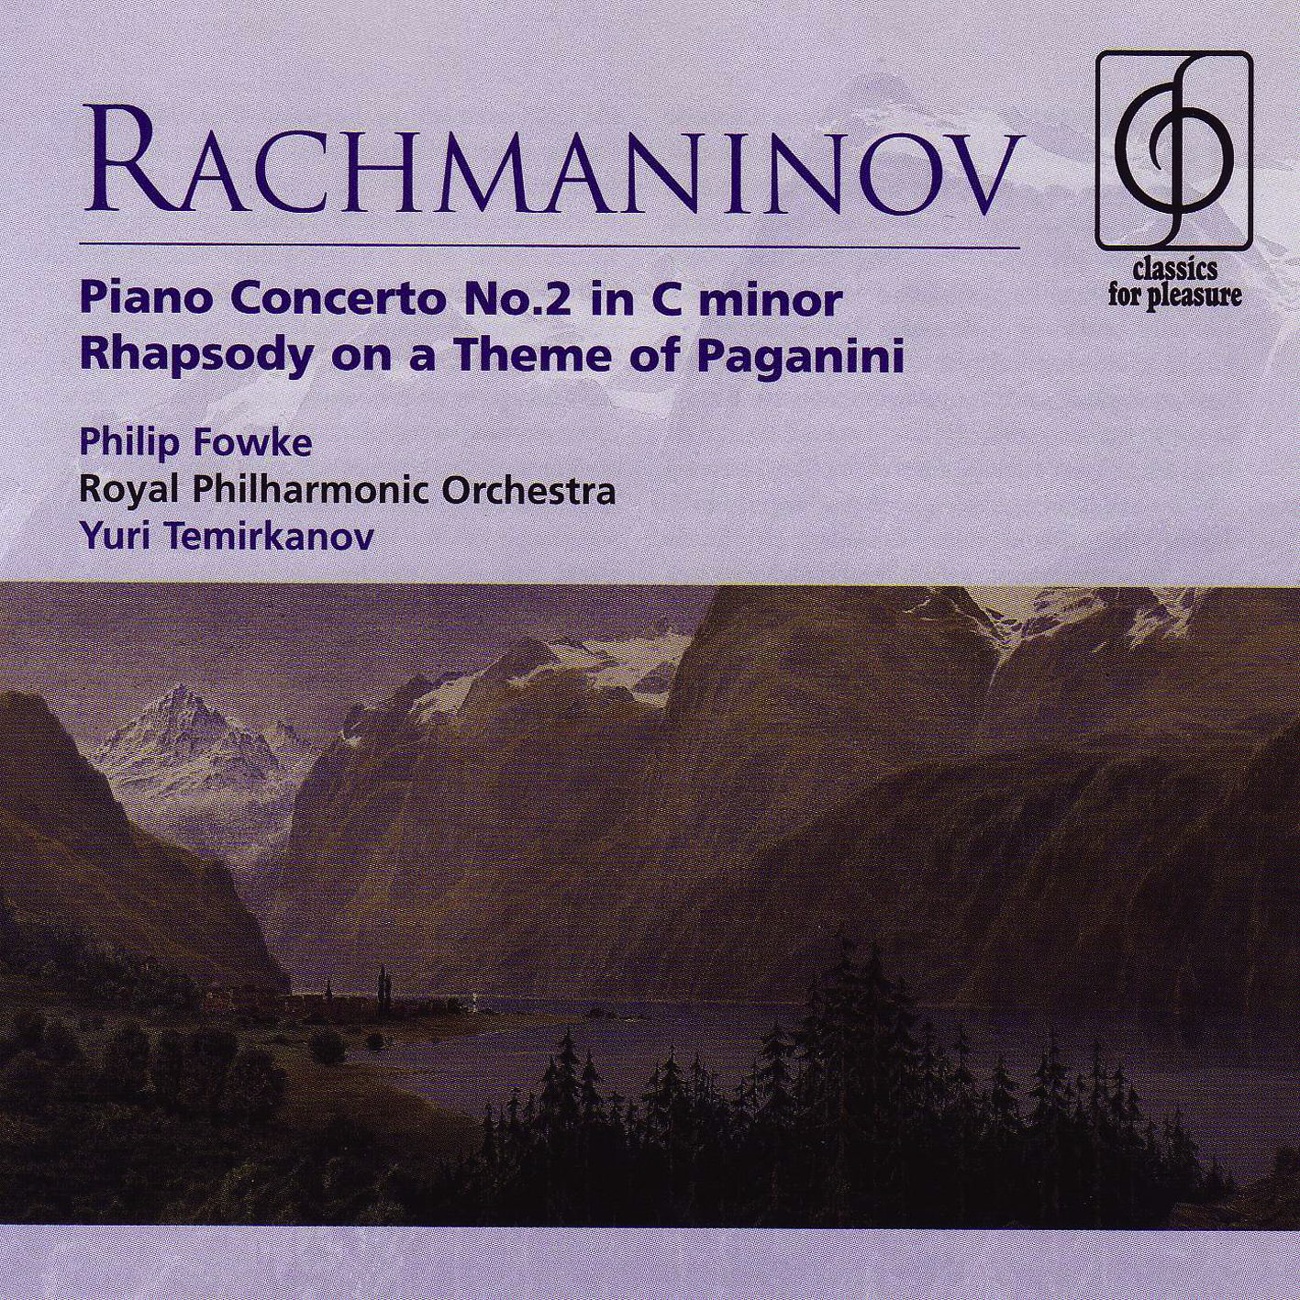 Rhapsody on a Theme of Paganini Op. 43: Introduction (Allegro vivace), Variation I & Tema